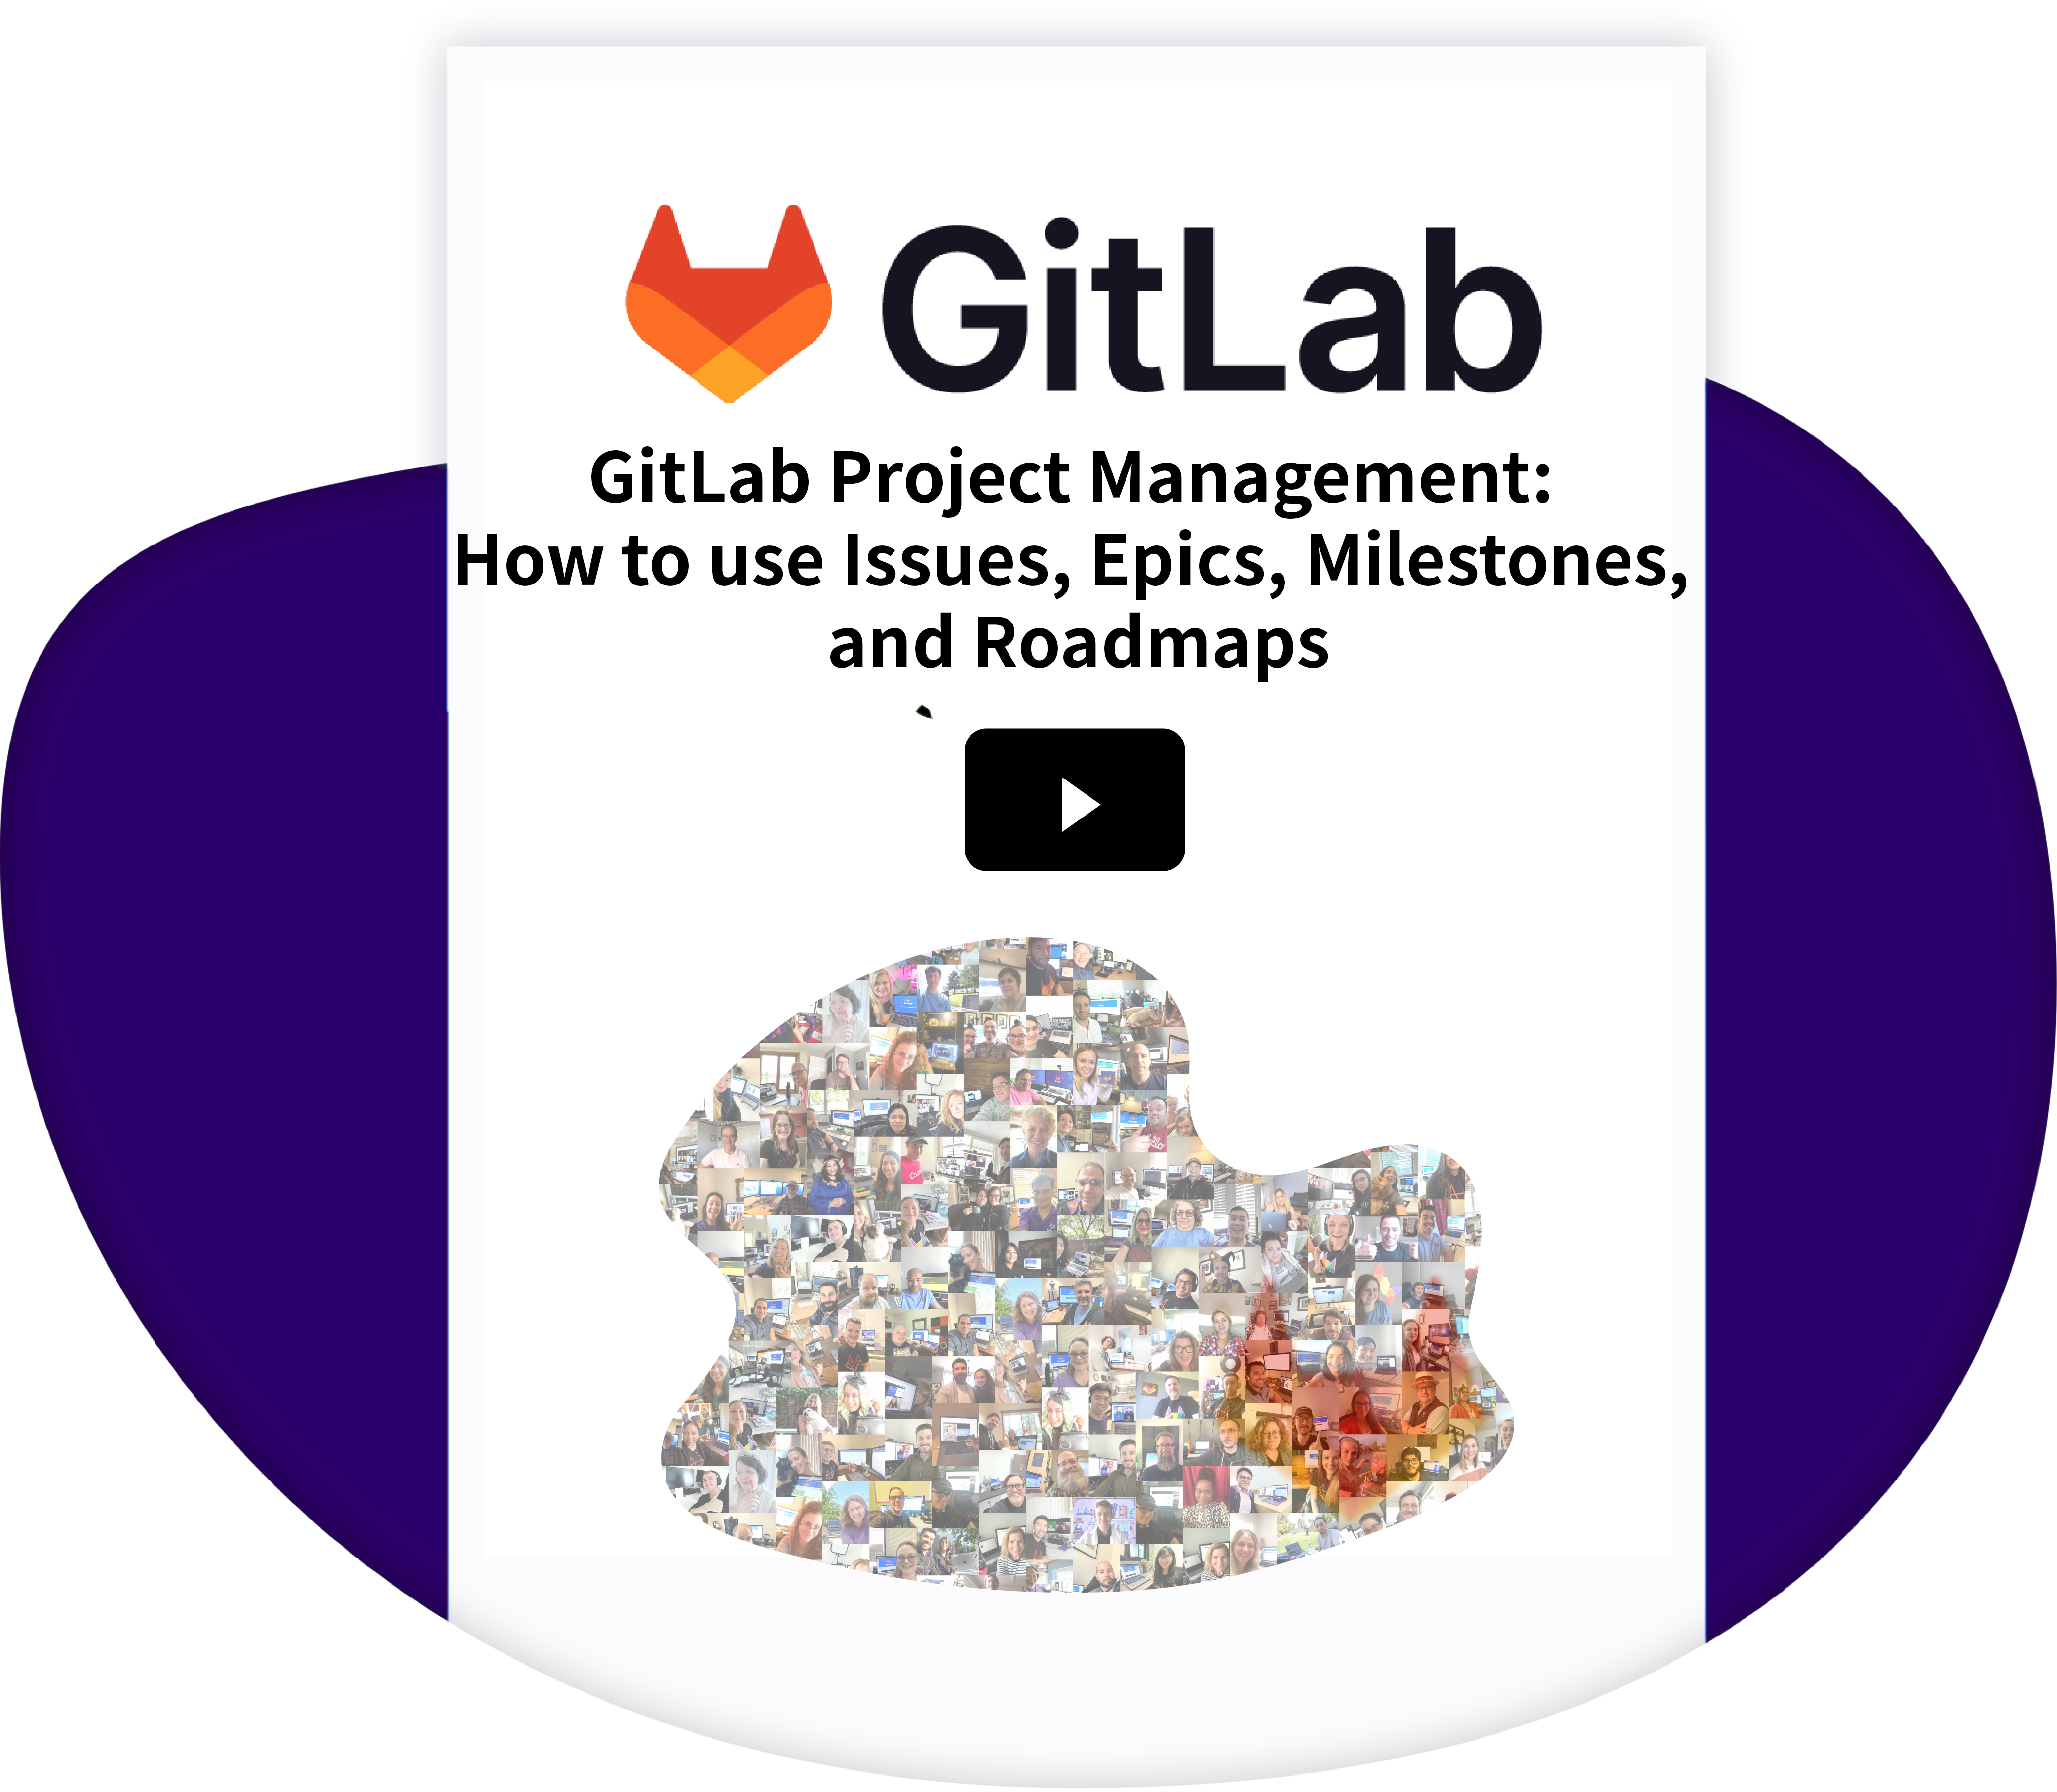 009_GitLab Project Management How to use Issues, Epics, Milestones, and Roadmaps